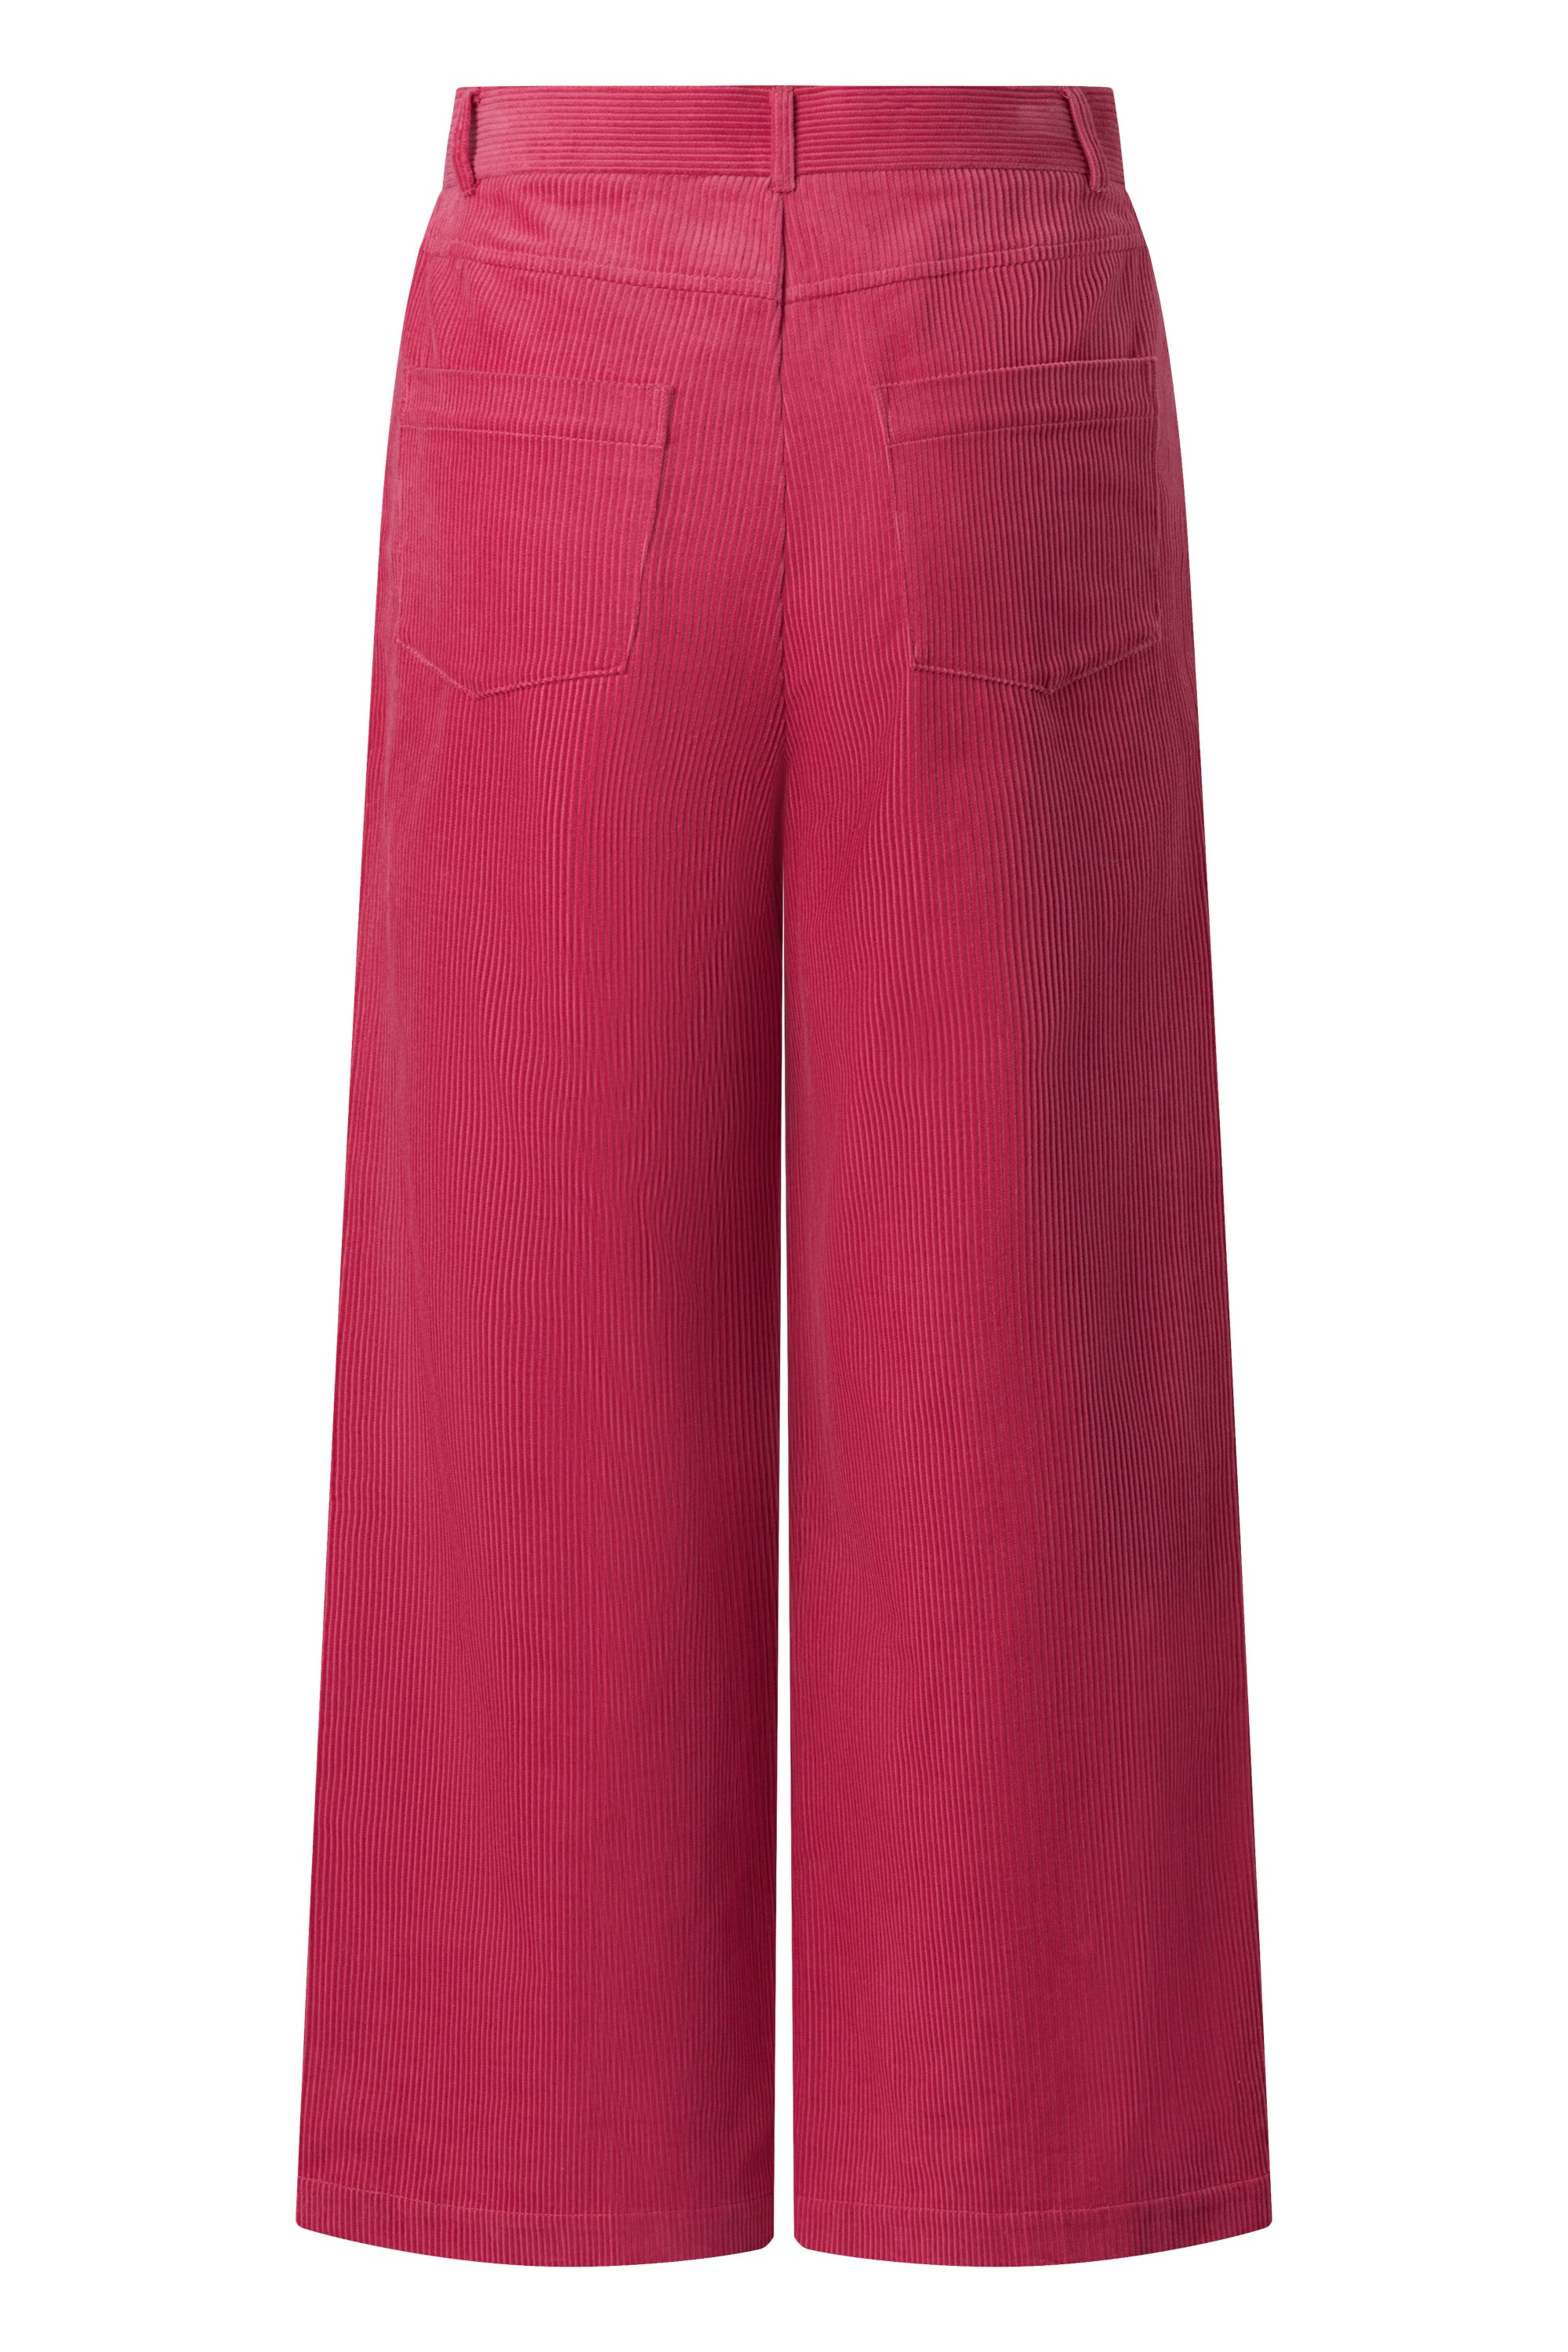 nué notes Gosta Pants - Faded Rose PANTS 338 Faded Rose